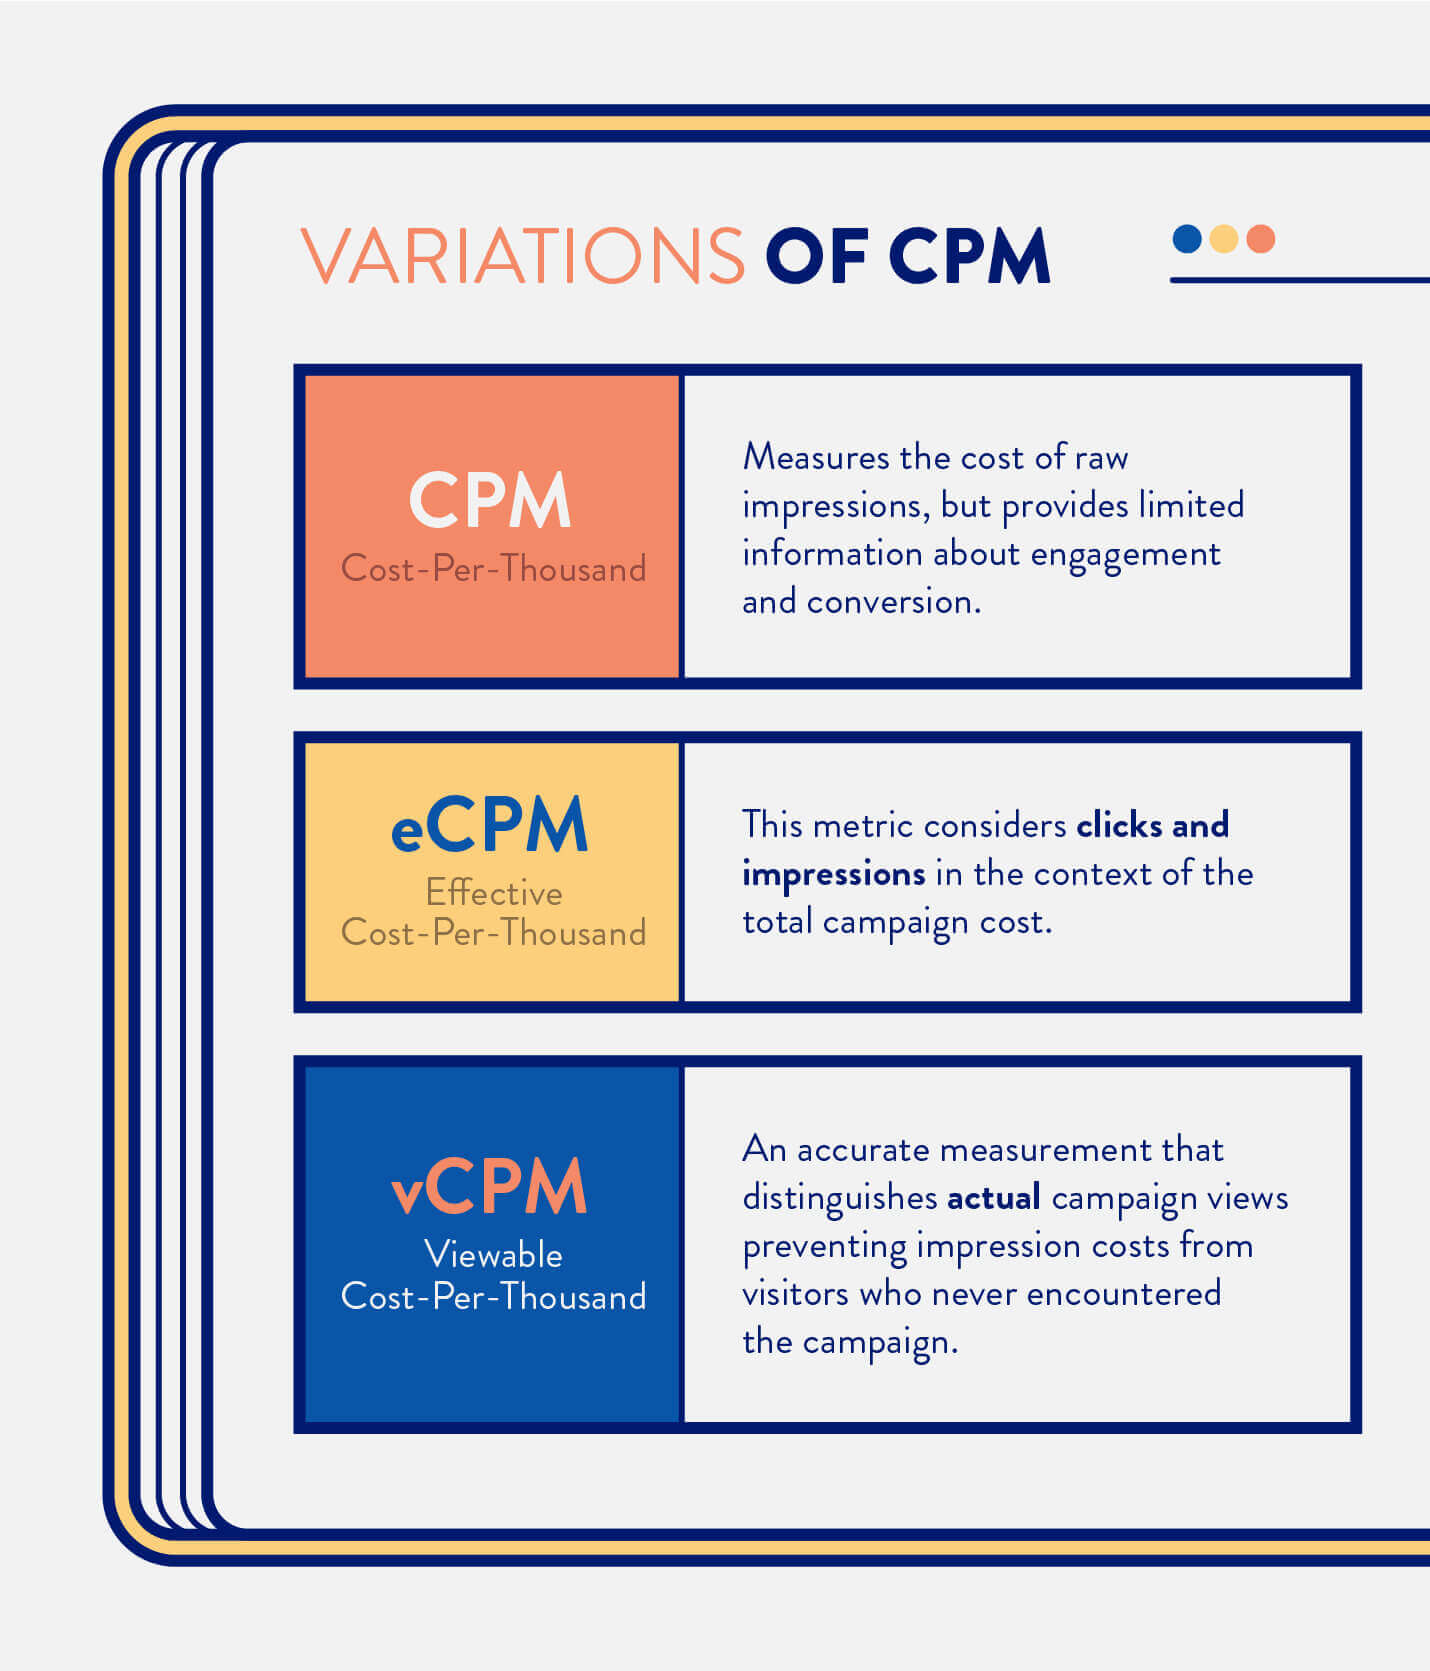 comparing CPM, eCPM, and vCPM variations of effective and viewable cost per thousand impressions